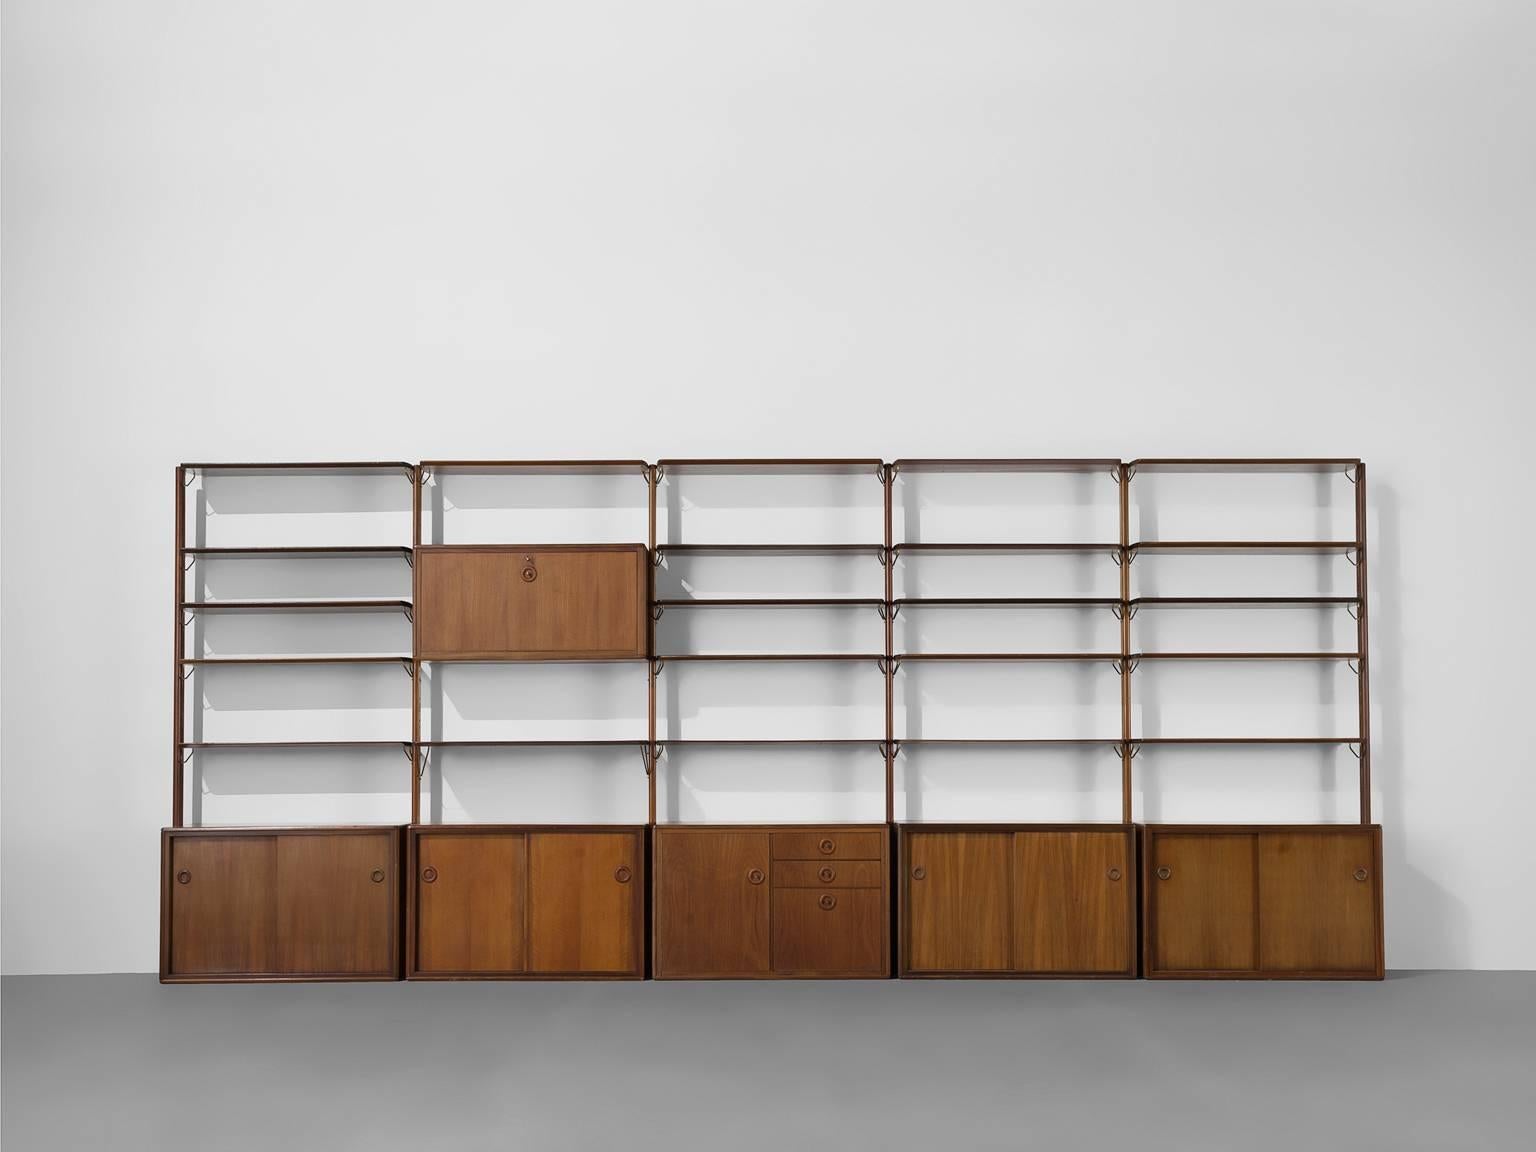 Wall unit, teak, brass, The Netherlands, 1950s.

This large very large wall unit is well-designed. Although the size of this cabinet is what draws the intention, the devil is in the detail. The handles are executed with a protruding ring and a brass